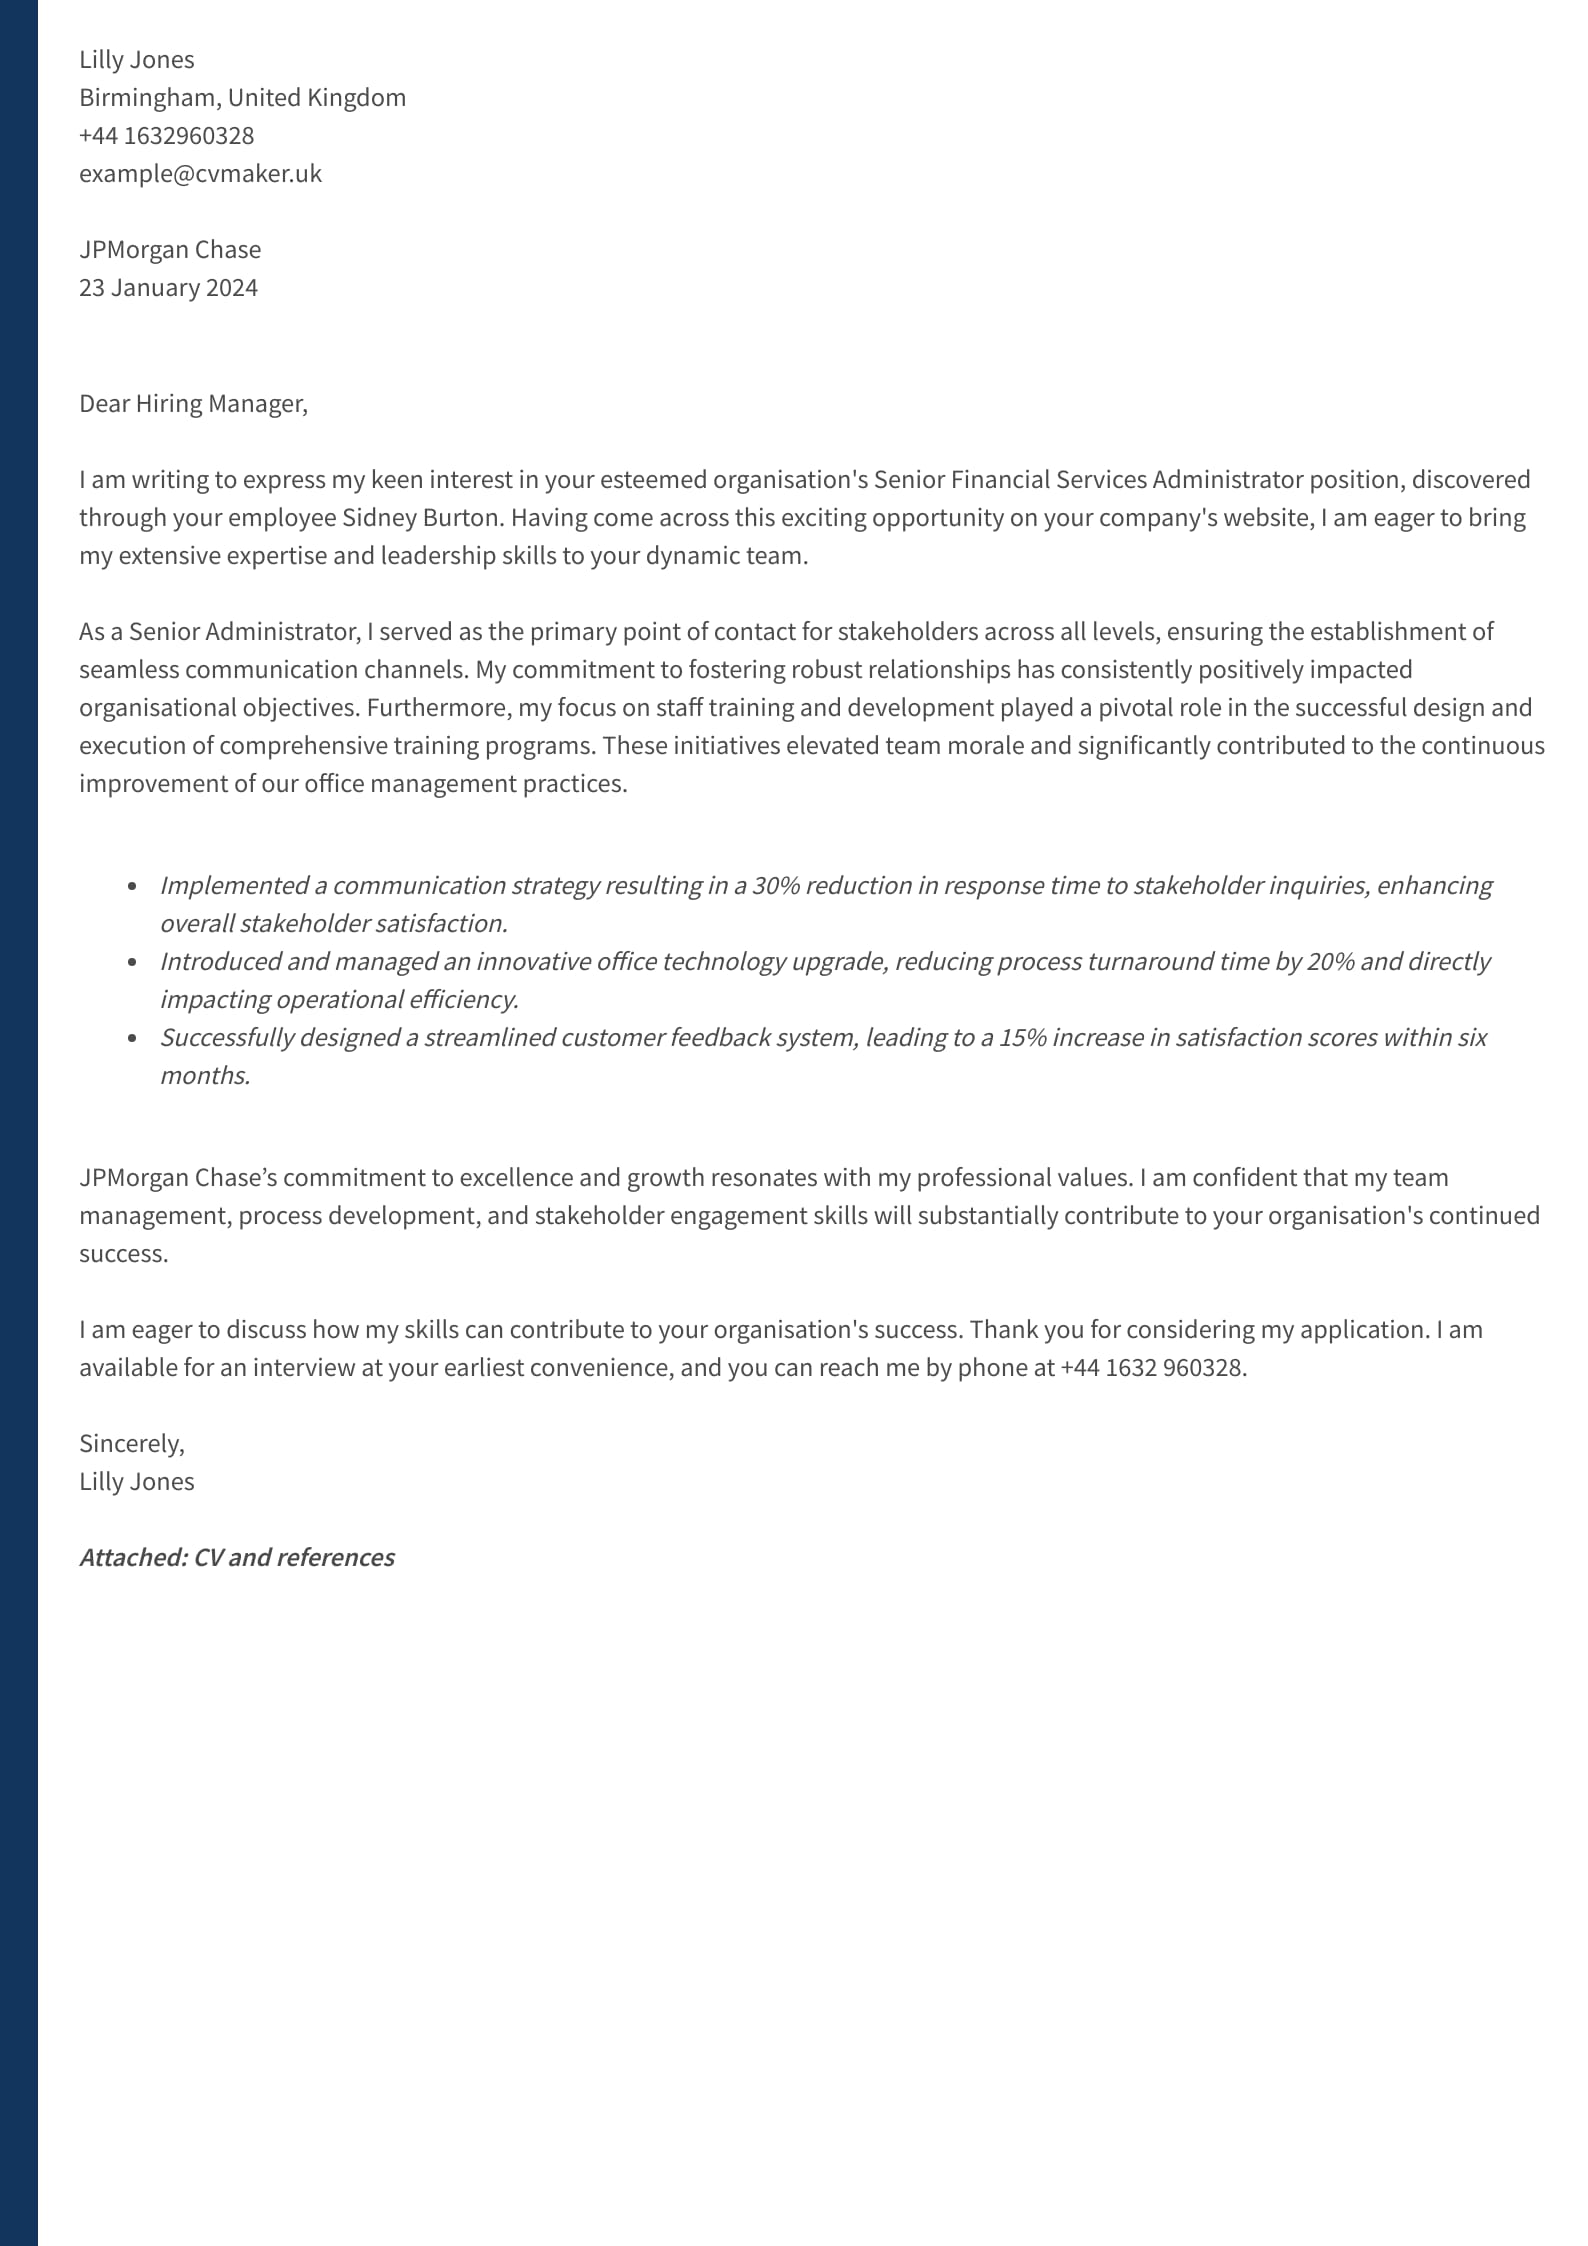 Cover letter example - Administrator - Oxford template